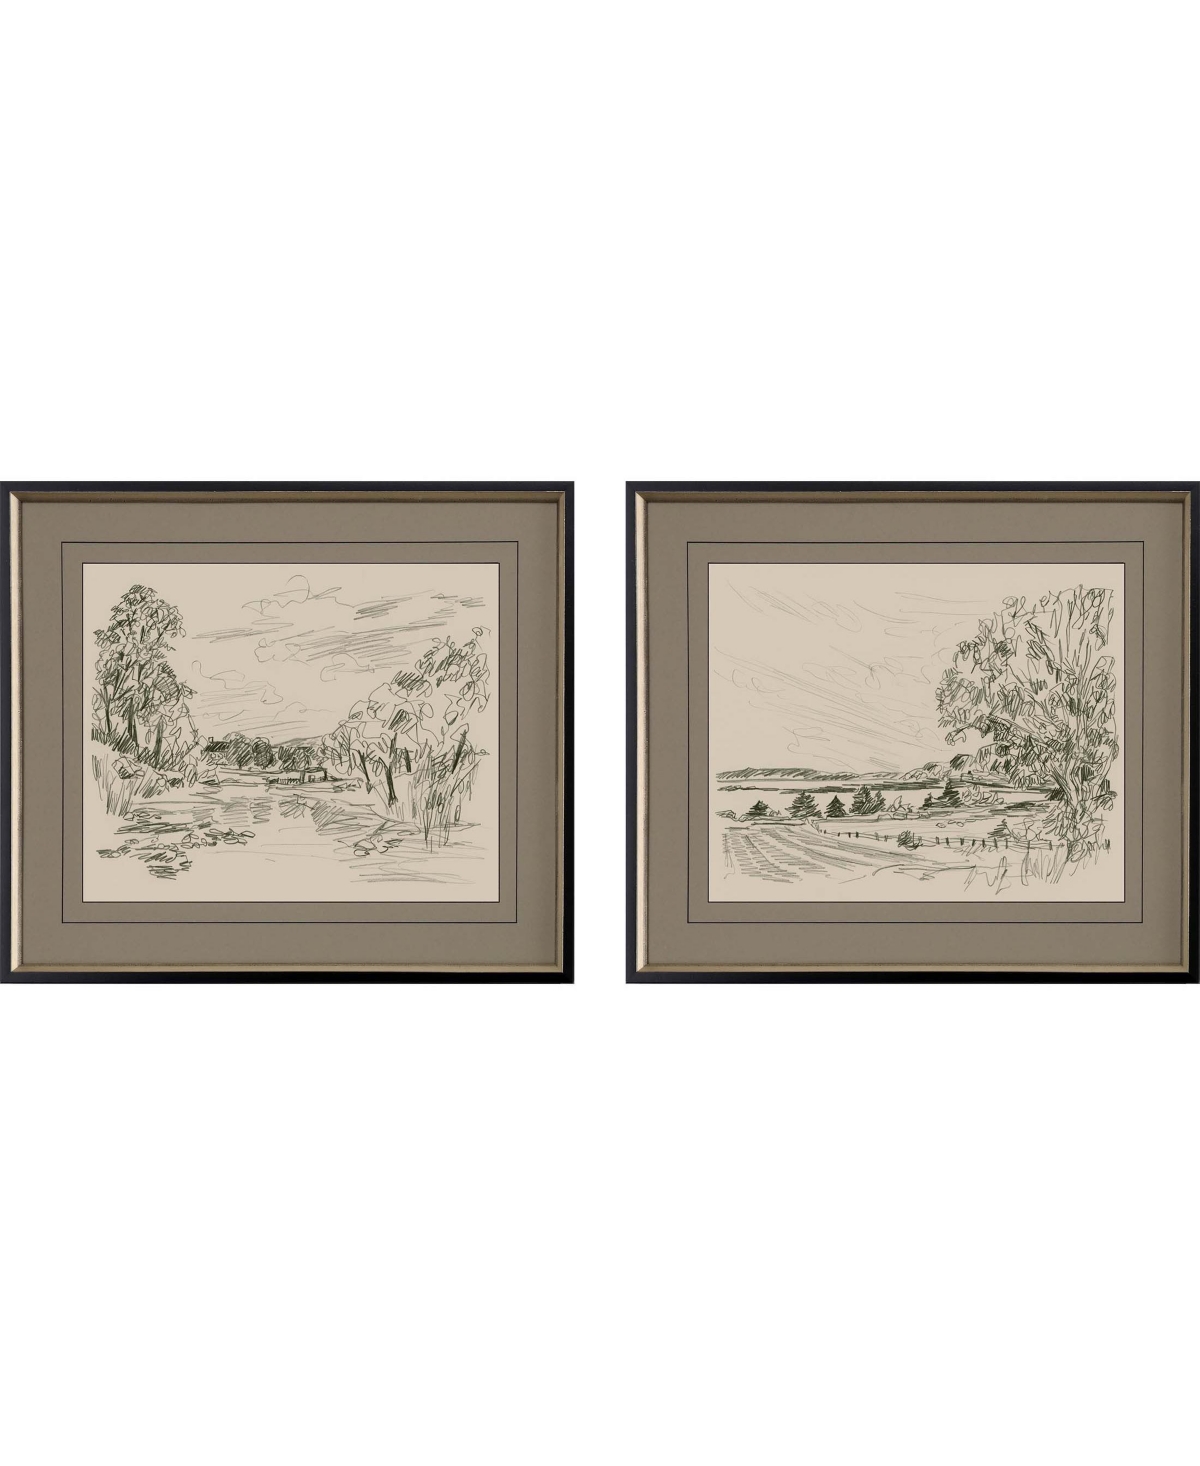 Paragon Picture Gallery Sepia Scenes Ii Framed Art, Set Of 2